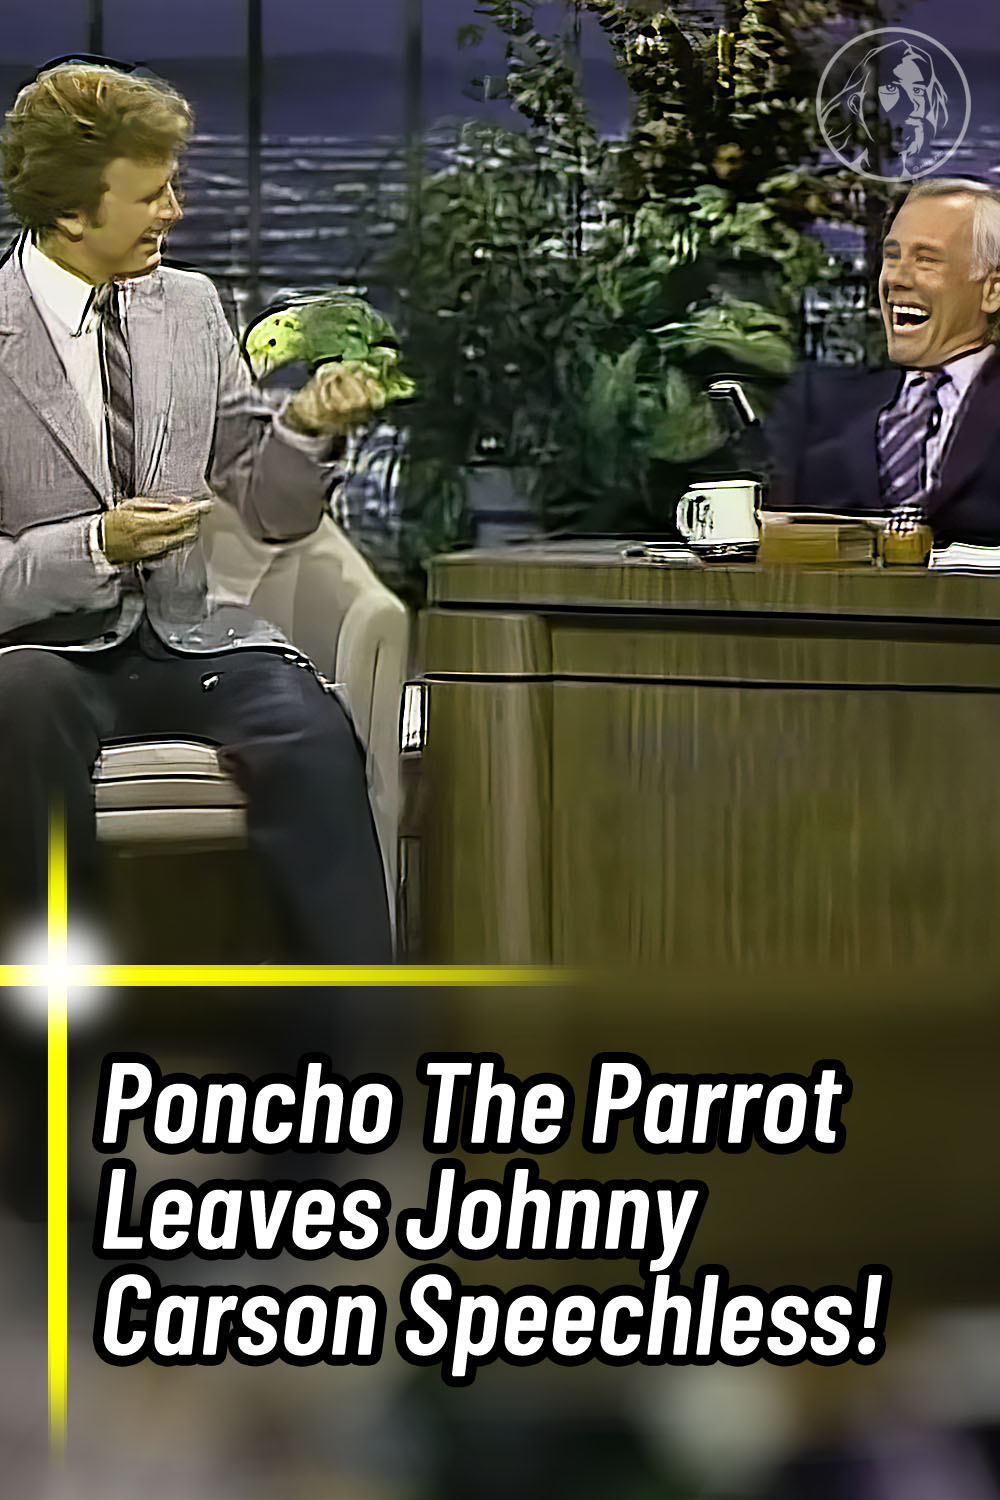 Poncho The Parrot Leaves Johnny Carson Speechless!